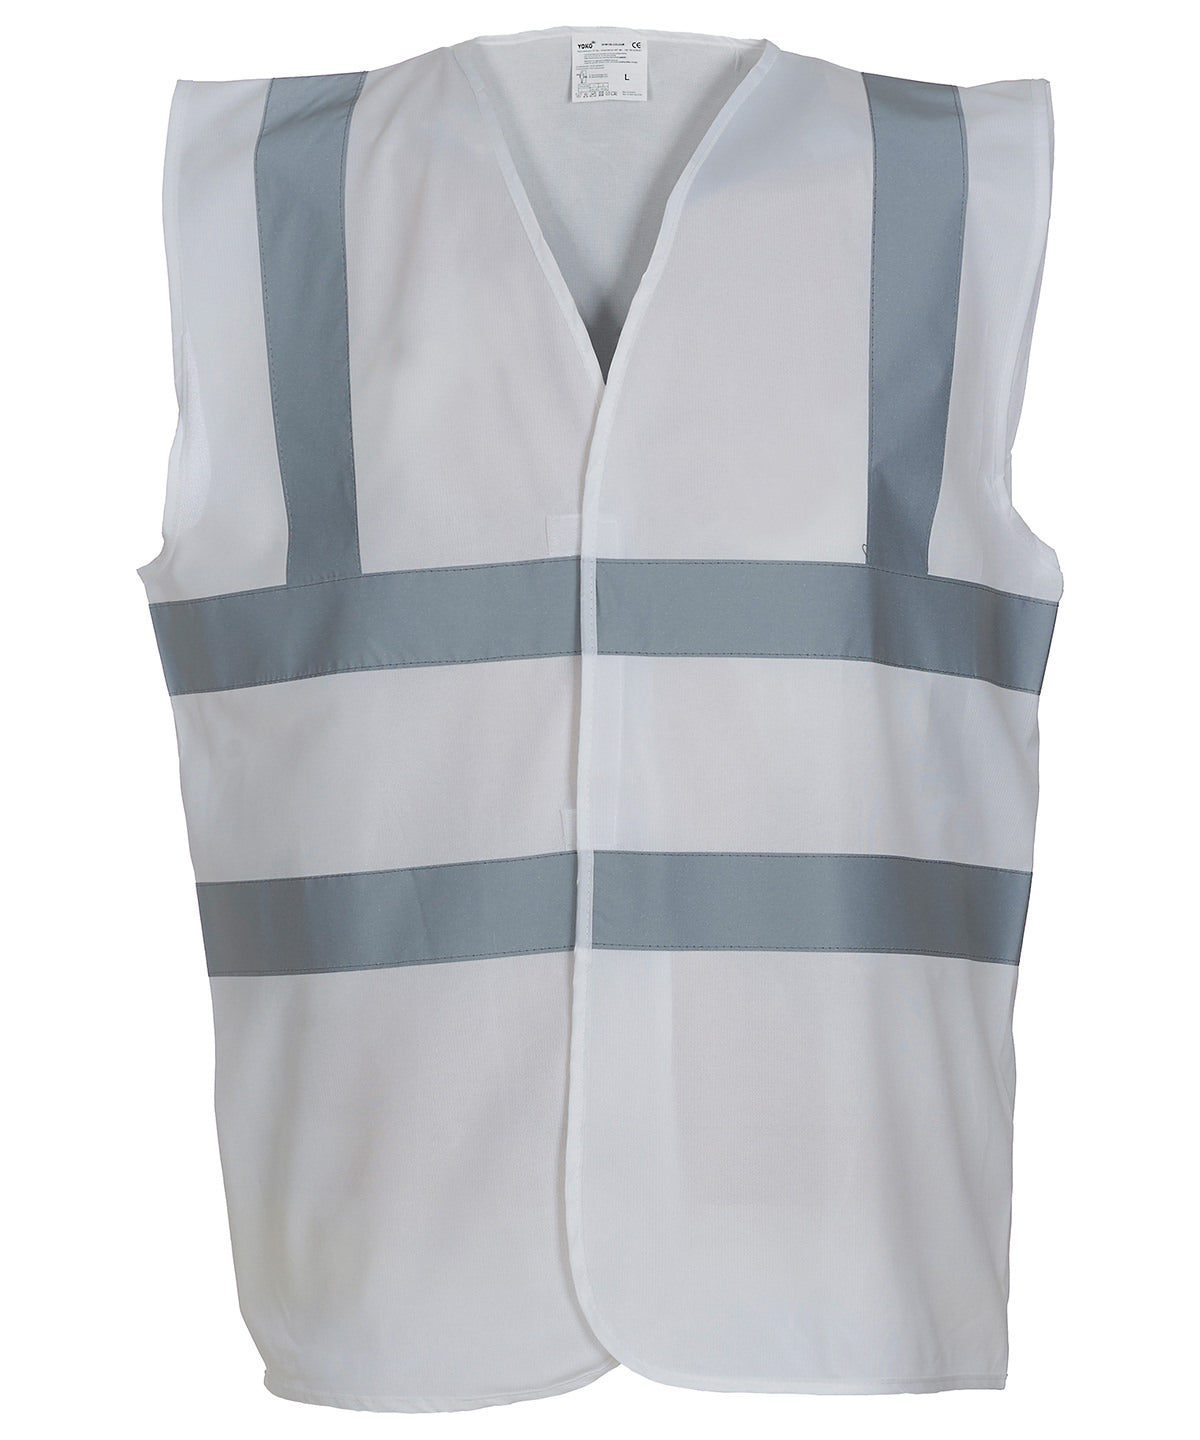 Yoko HVW100 Unisex Two Tone Class 1 Waistcoat/Work Safety Protective Gear Main color - COOZO